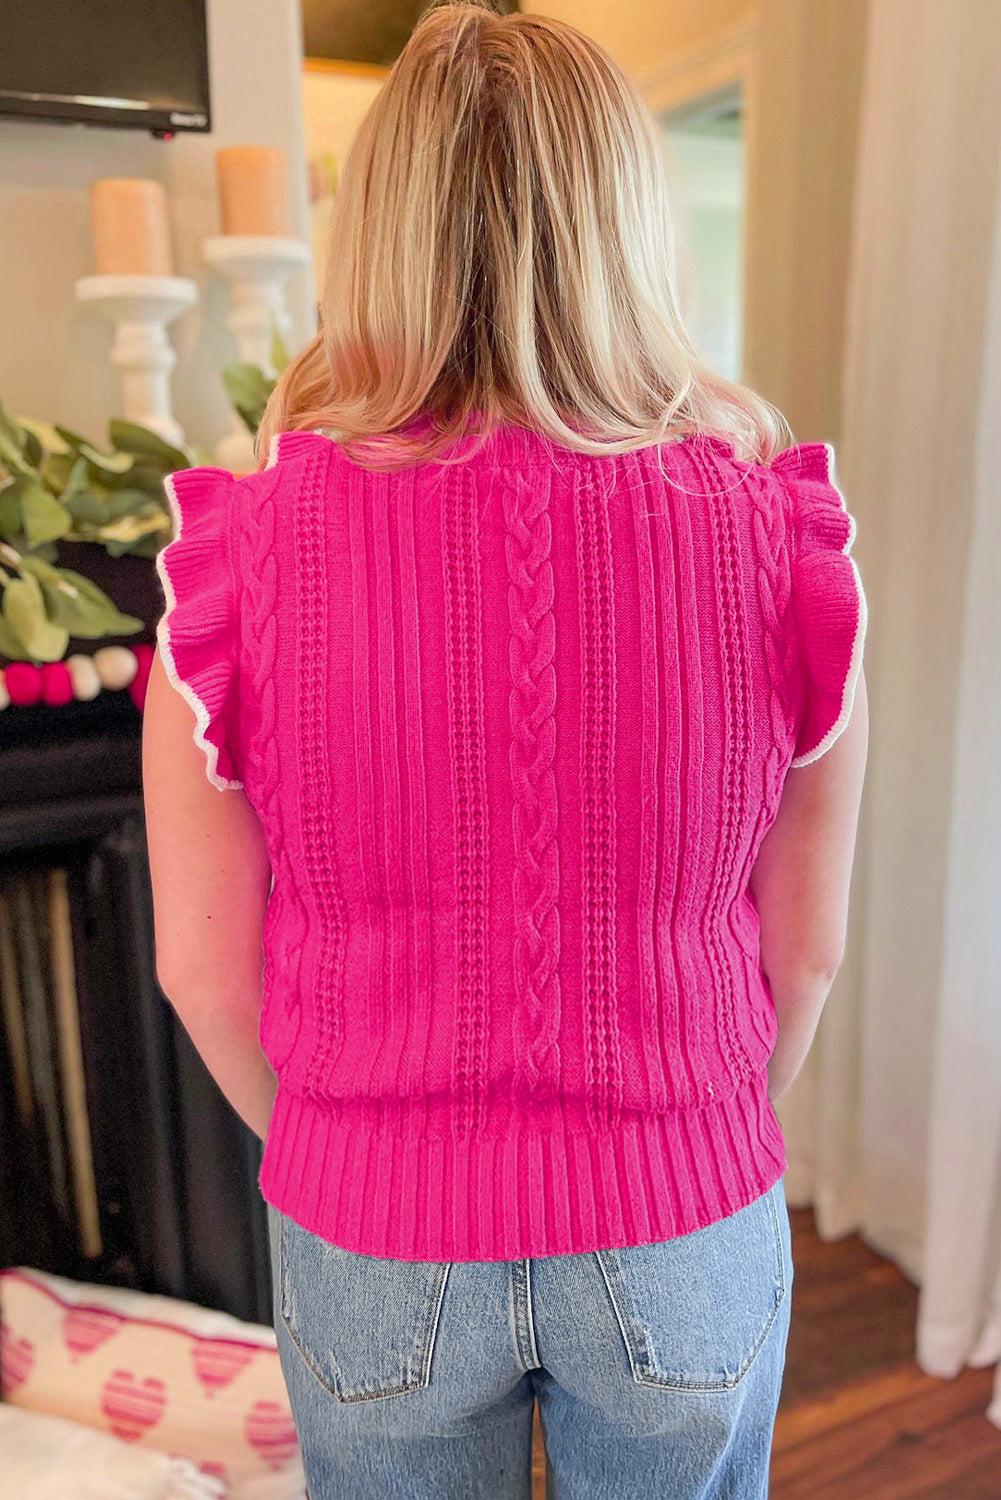 Strawberry Pink Contrast Trim Ruffle Sleeveless Twist Cable Knit Top